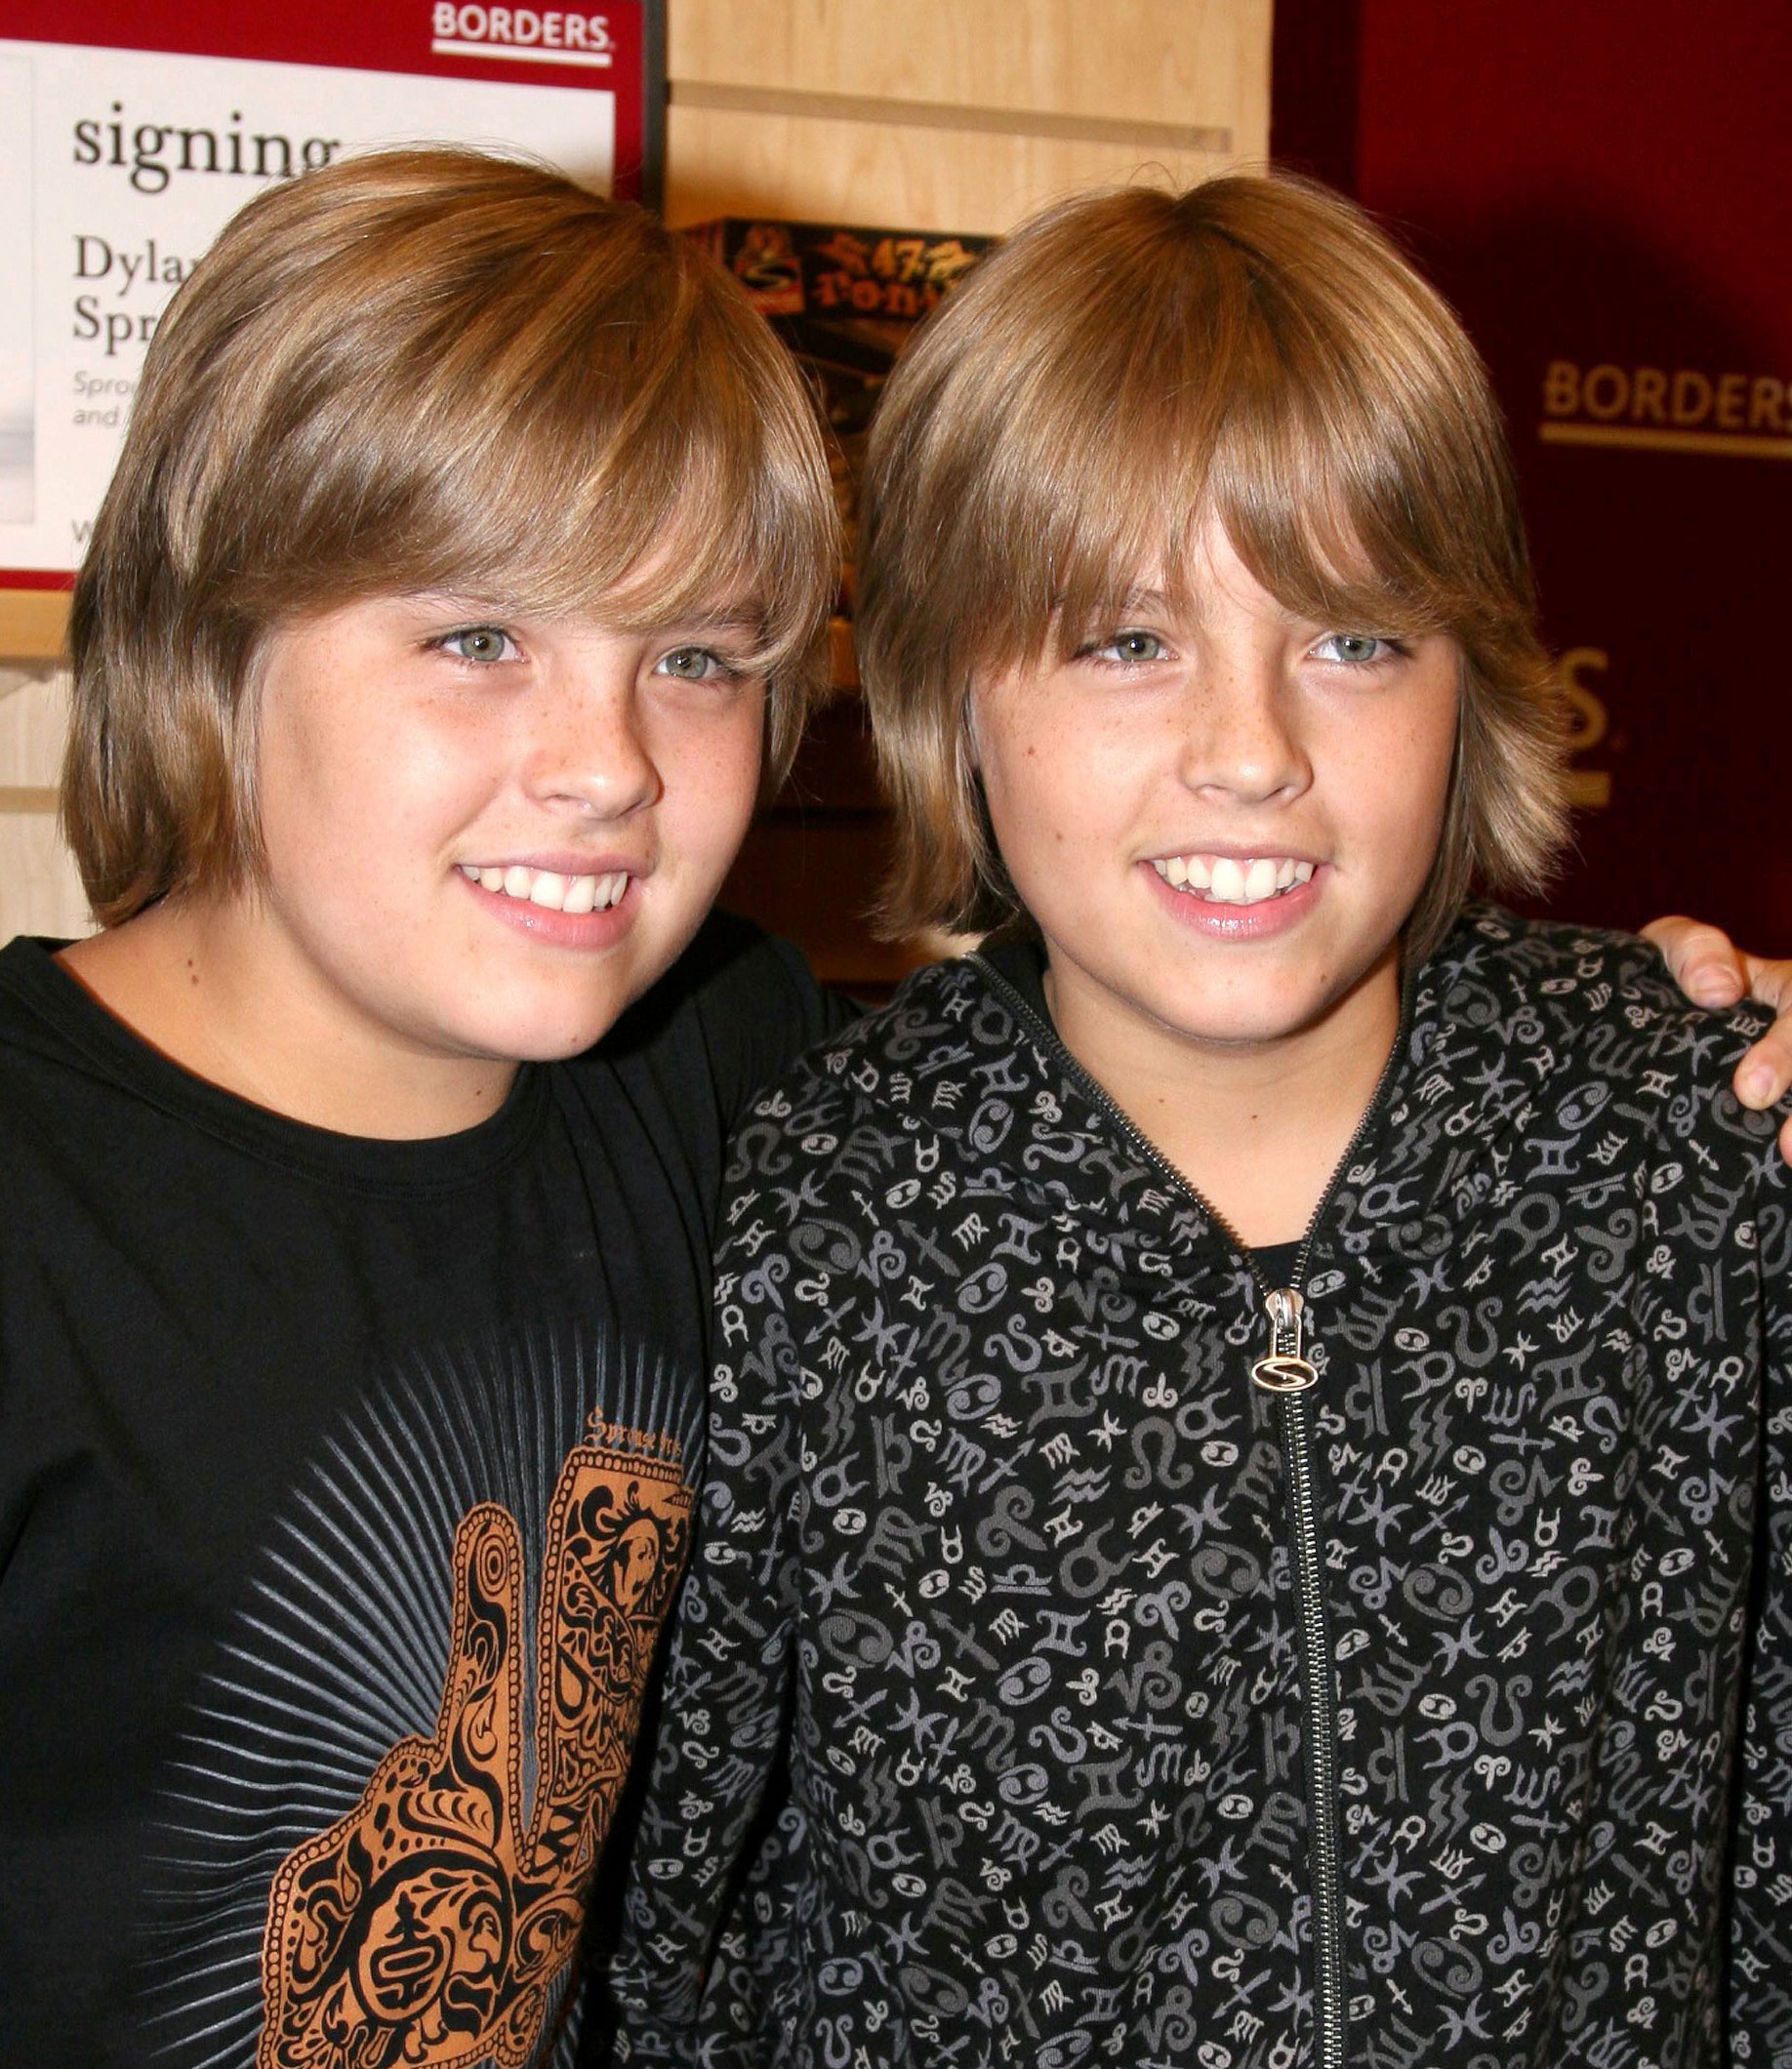 Dylan and Cole Sprouse in 2007